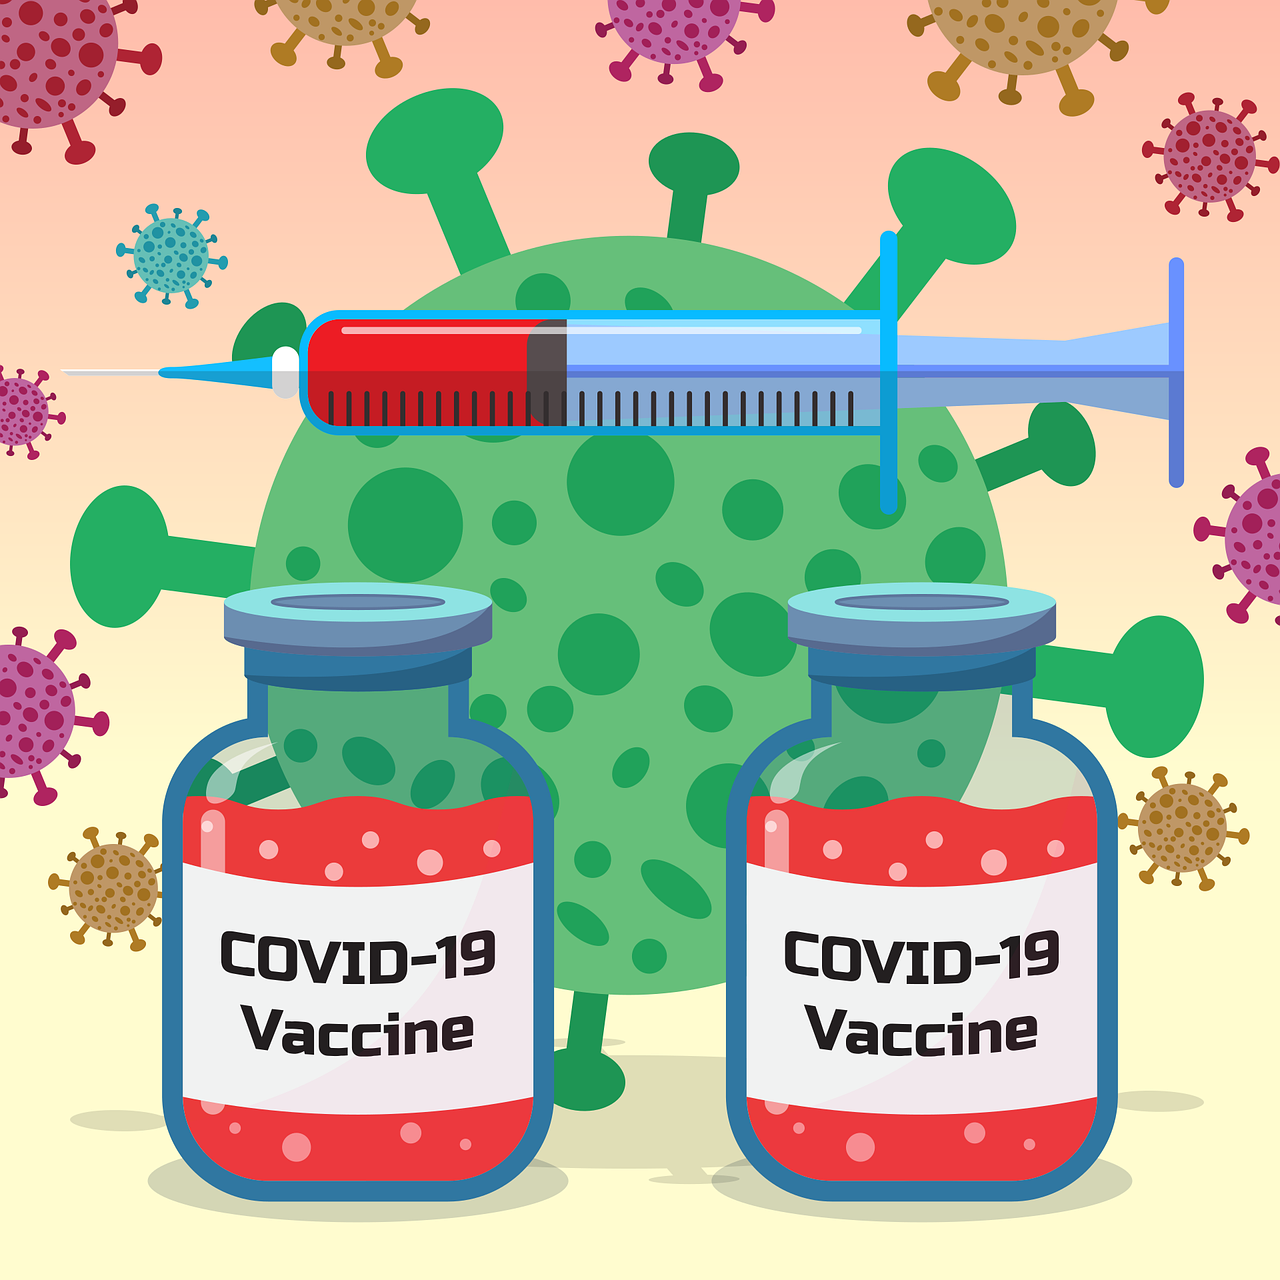 Two Covid vaccines